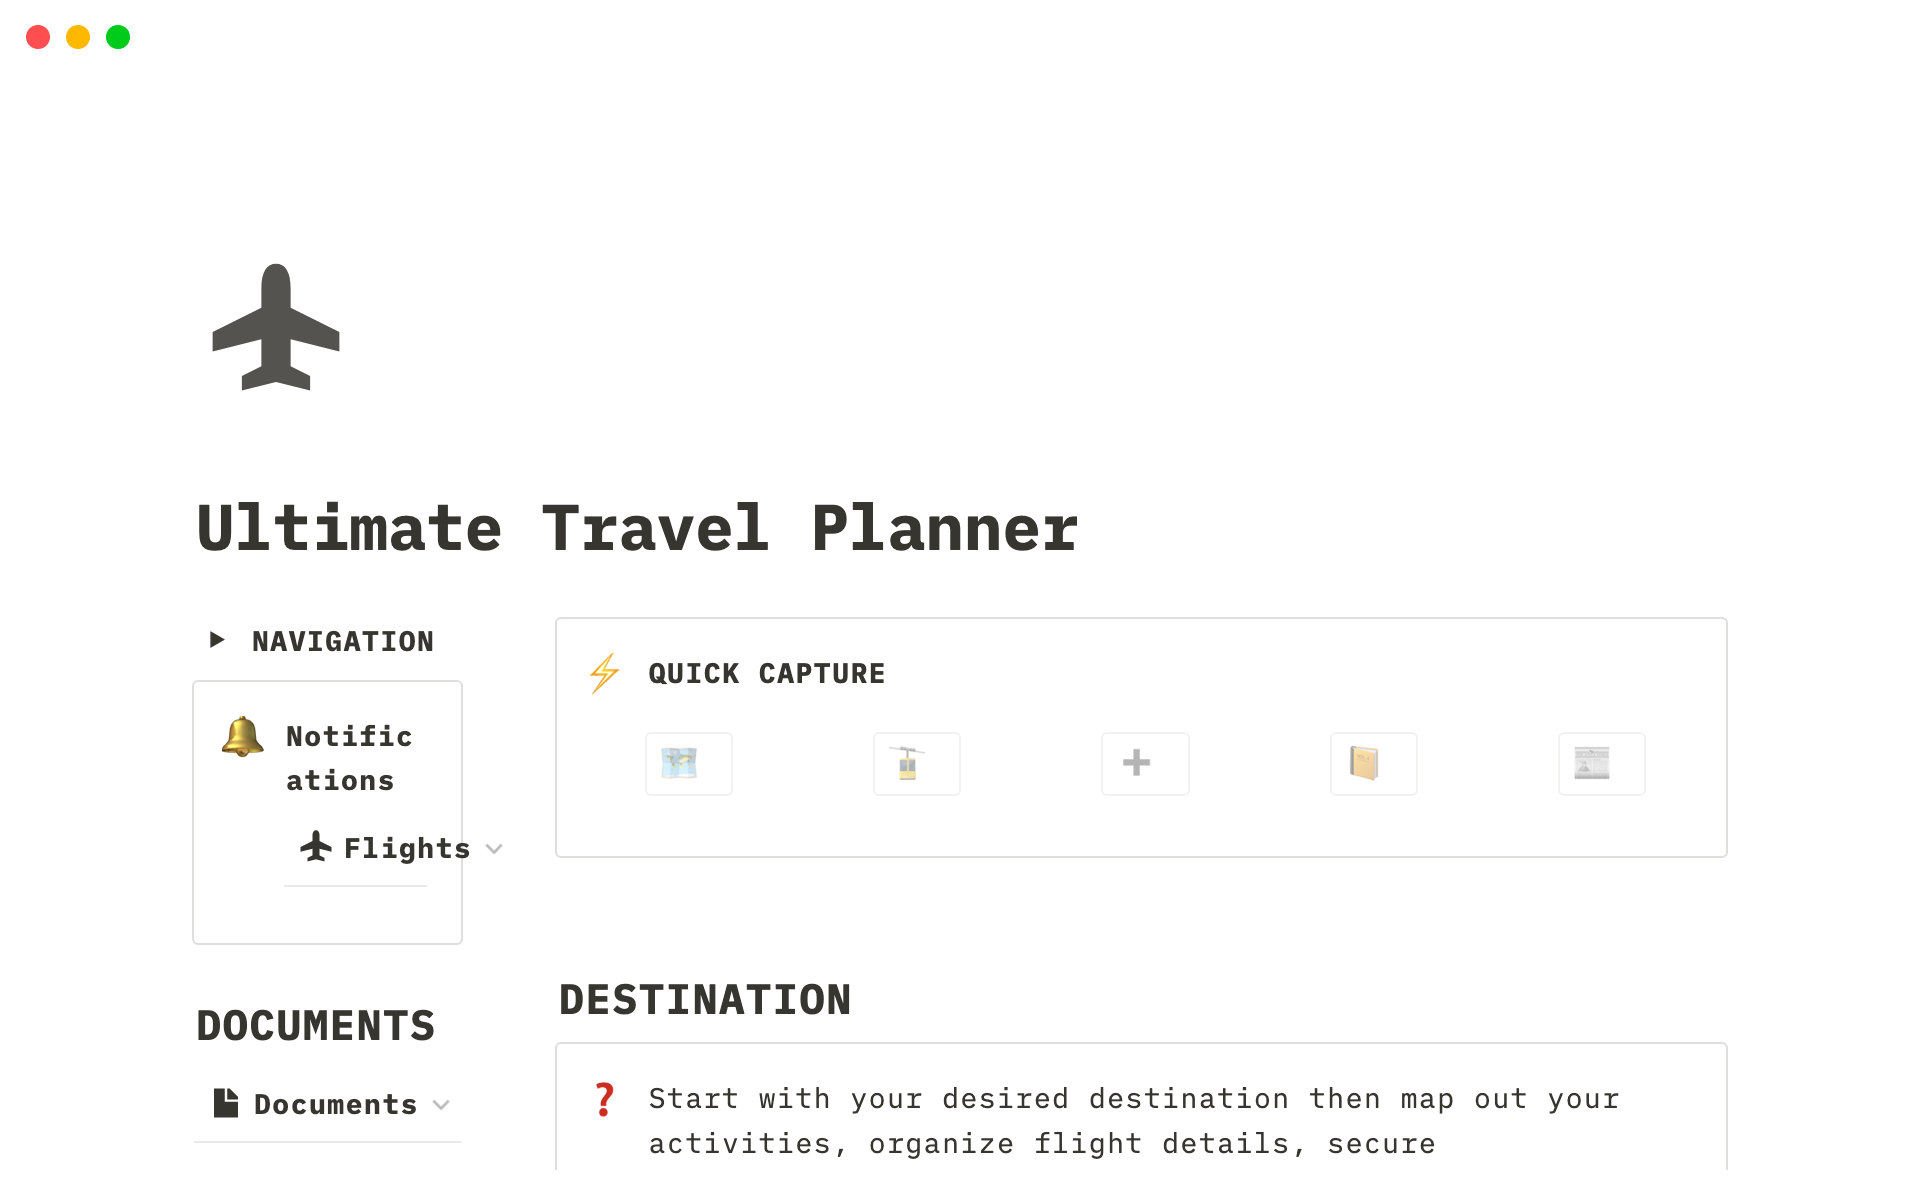 A simple travel planner that allows individuals to create a travel plan